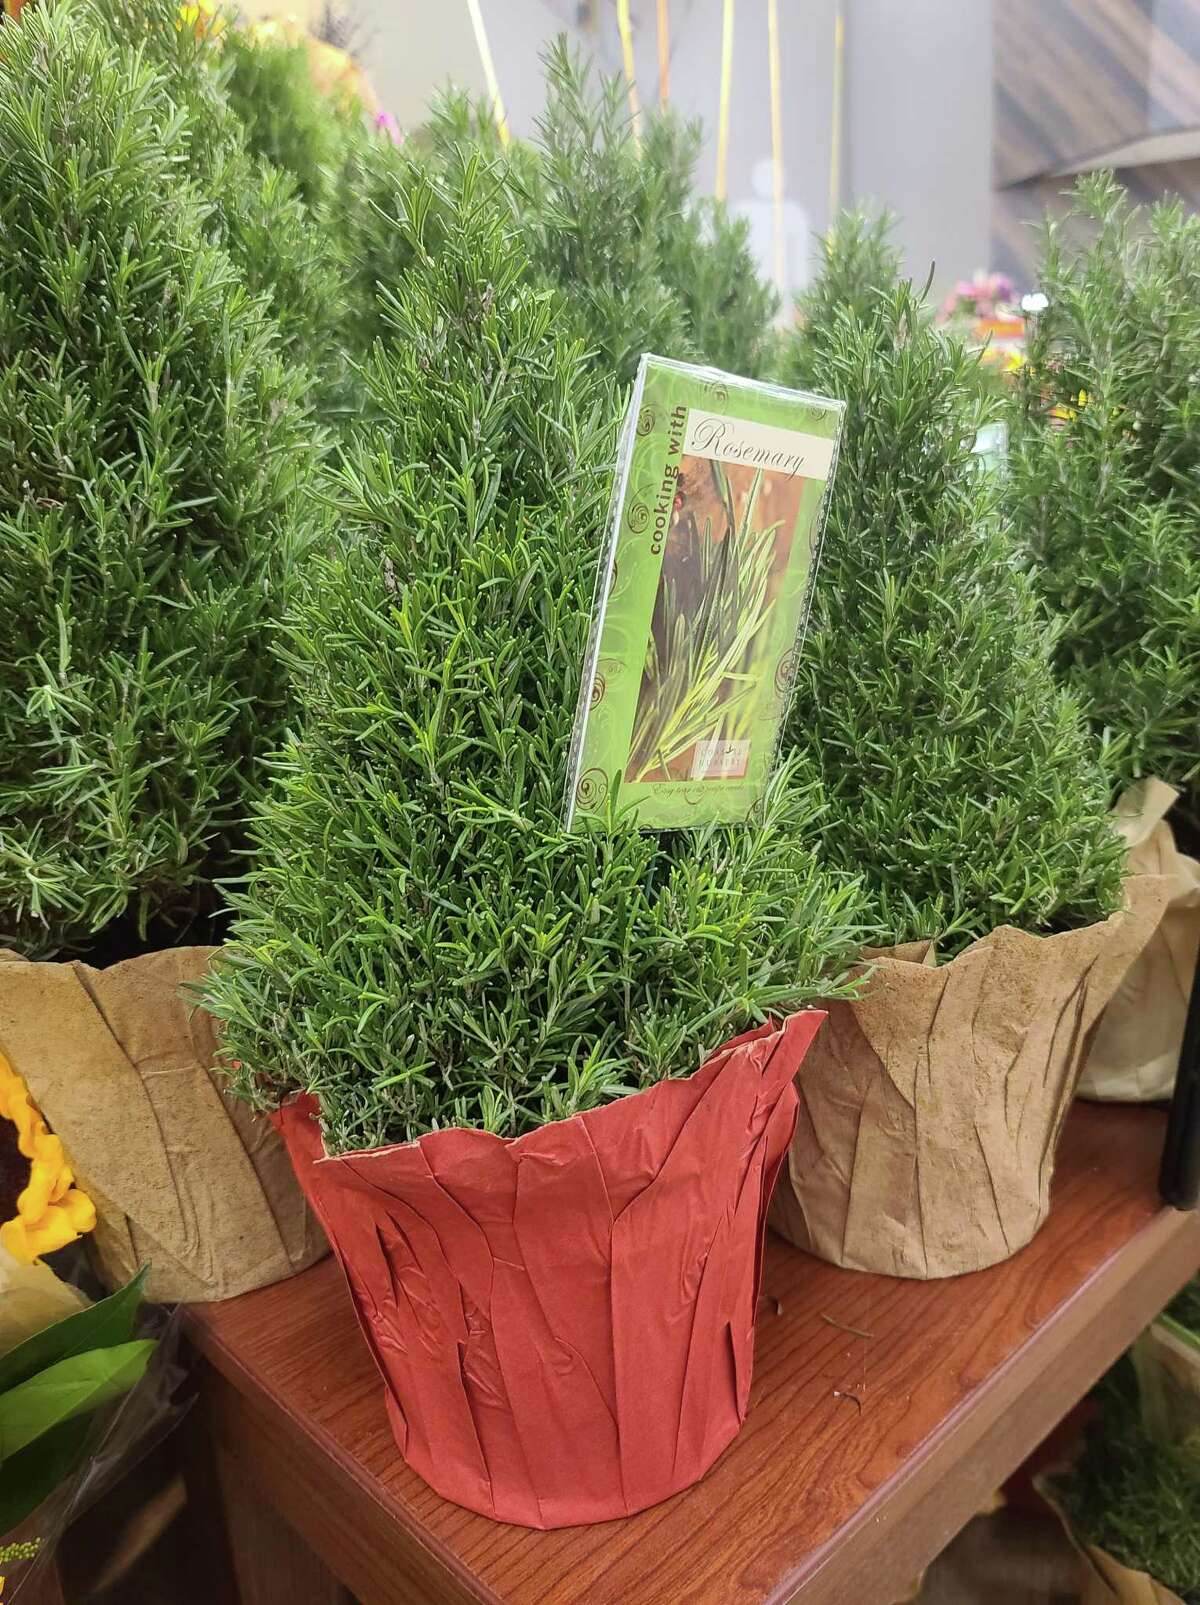 Take the decorative foil off your rosemary pot to prolong its life.